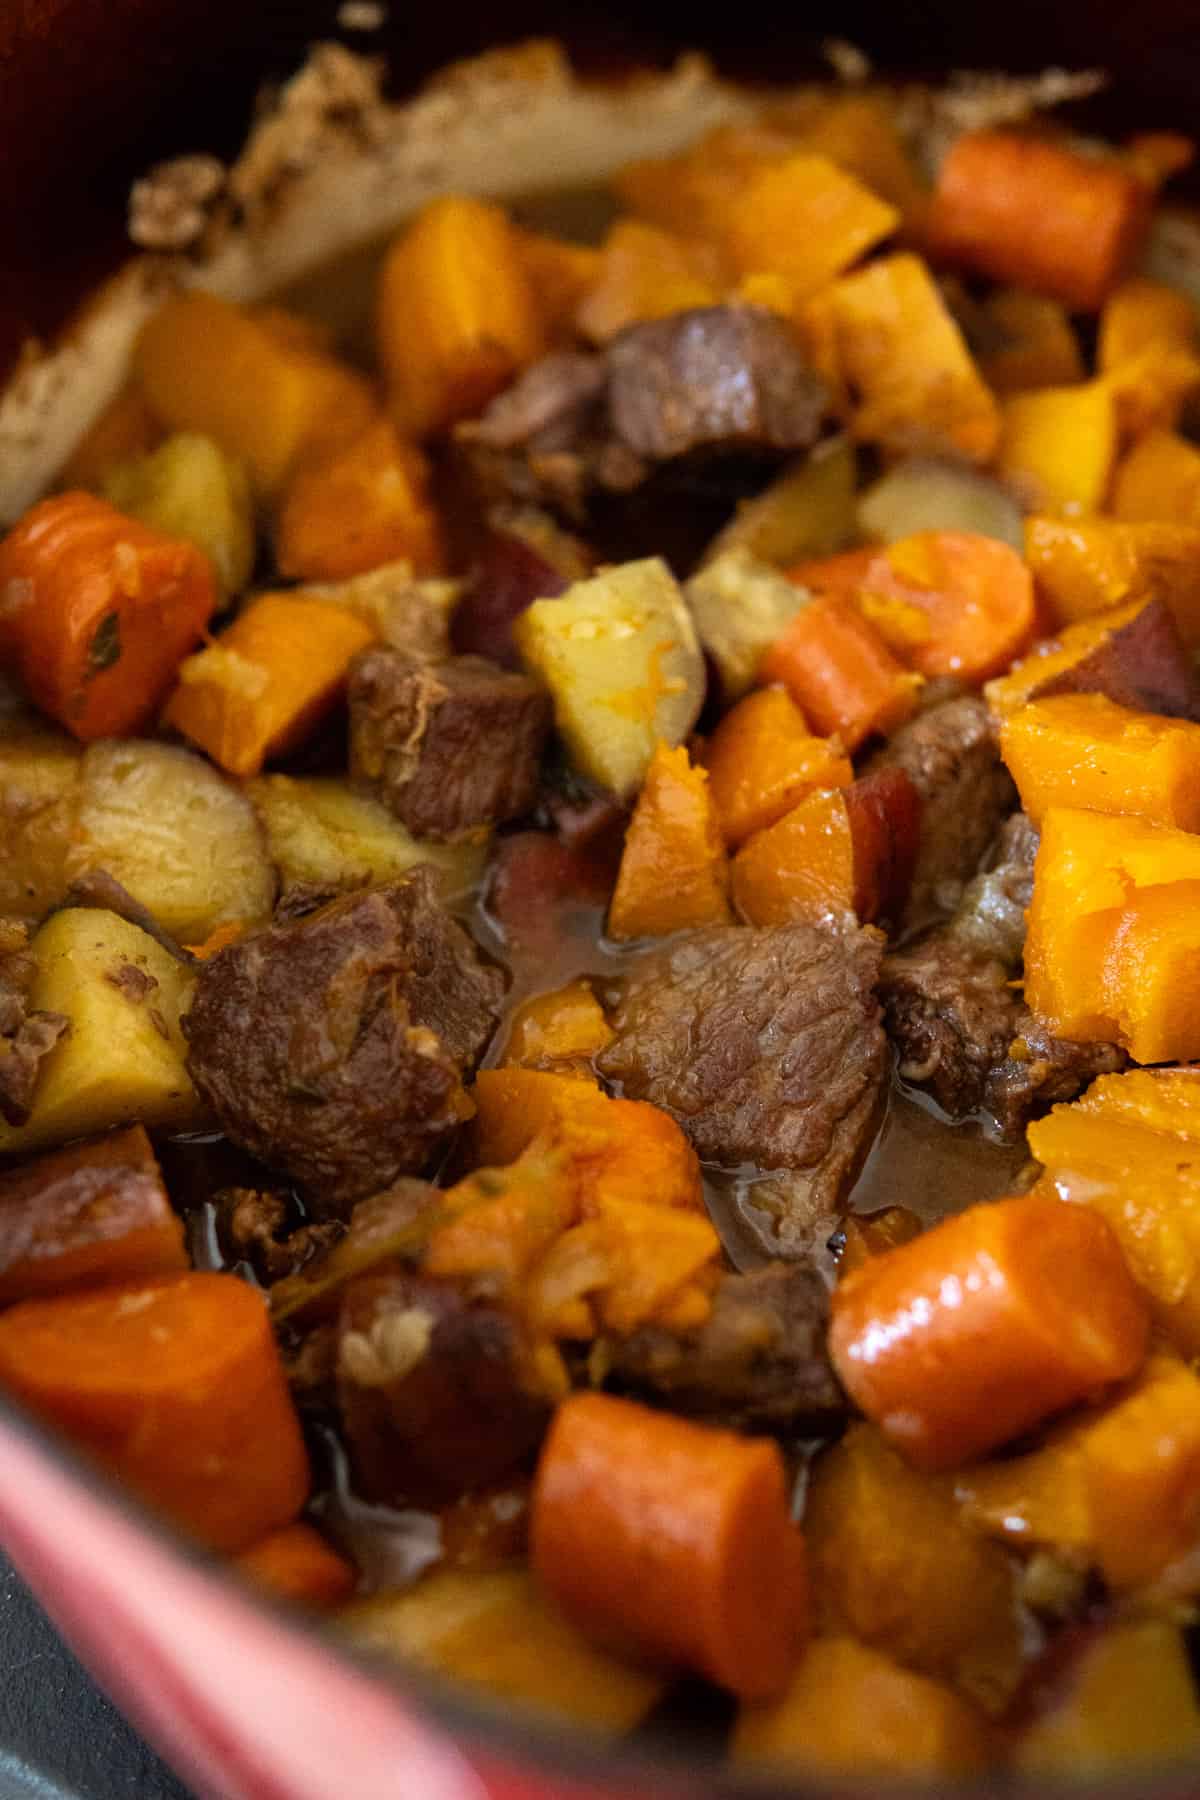 Cooked beef stew in a pot with carrots, potatoes, and butternut squash.